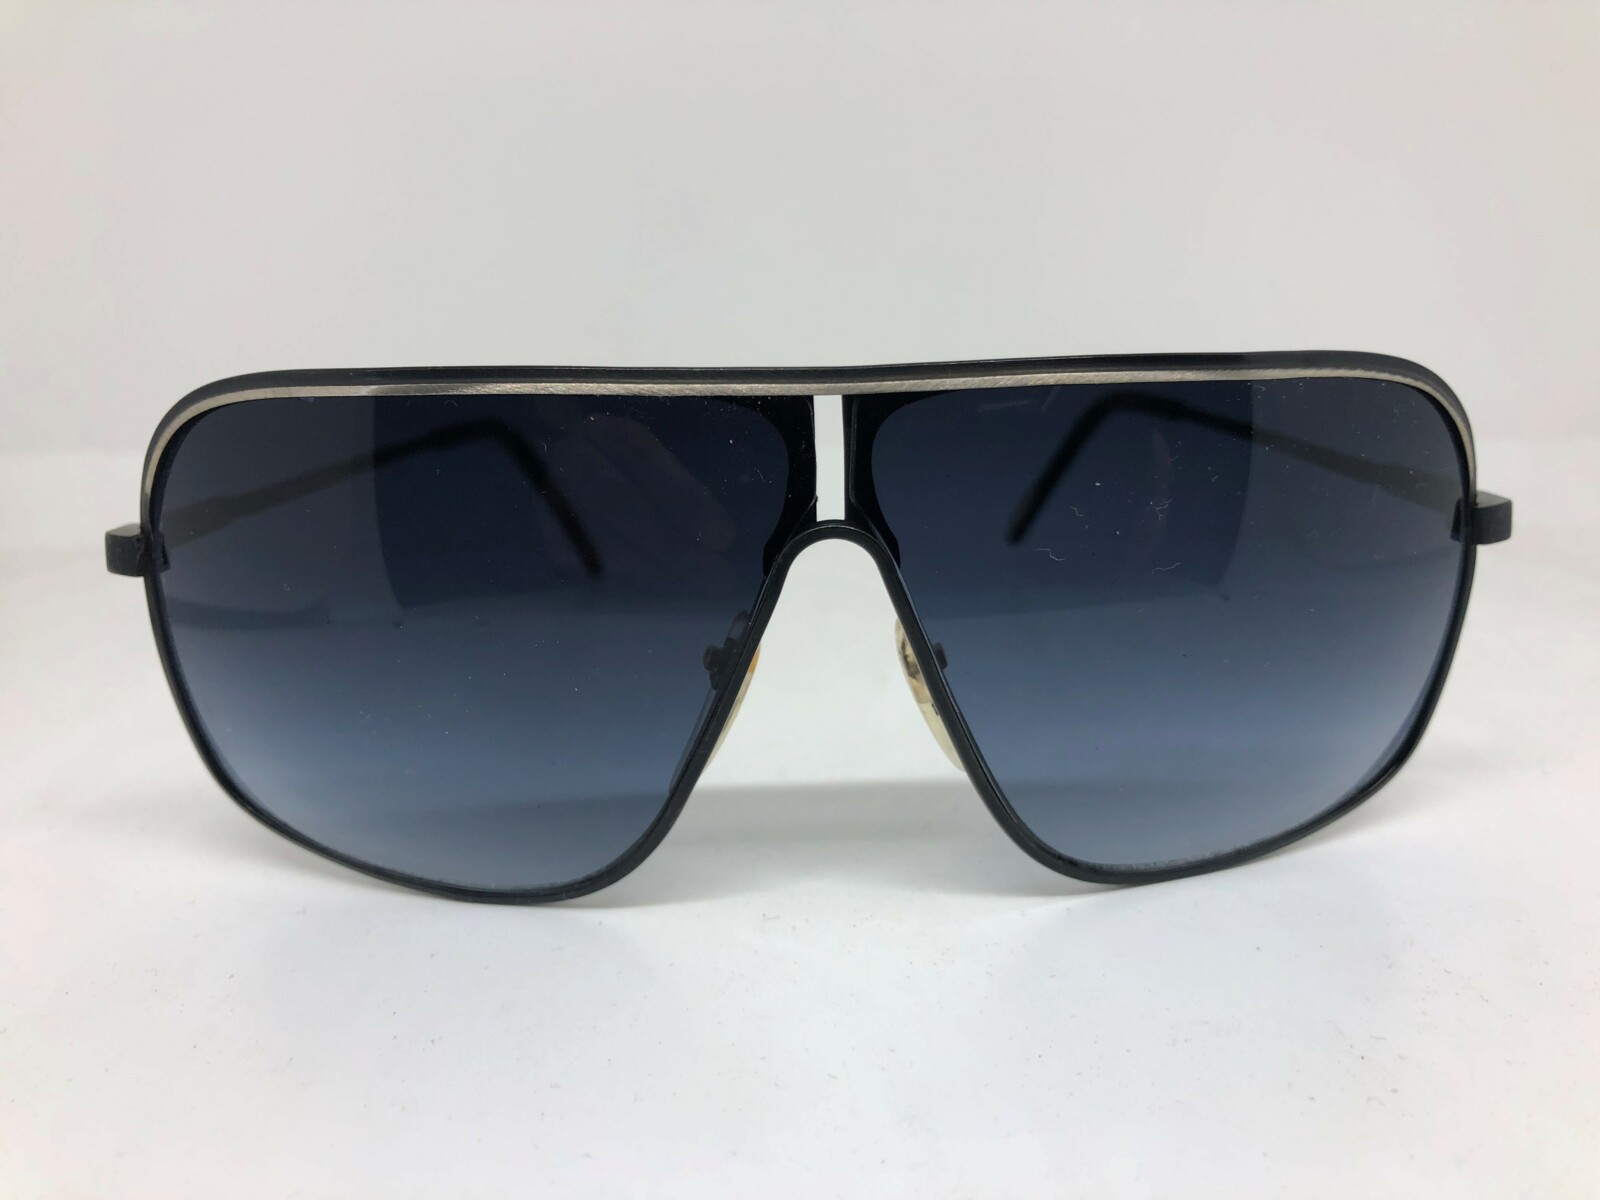 Gents Sunglasses with Graduated tint Mod 6032 - look designs